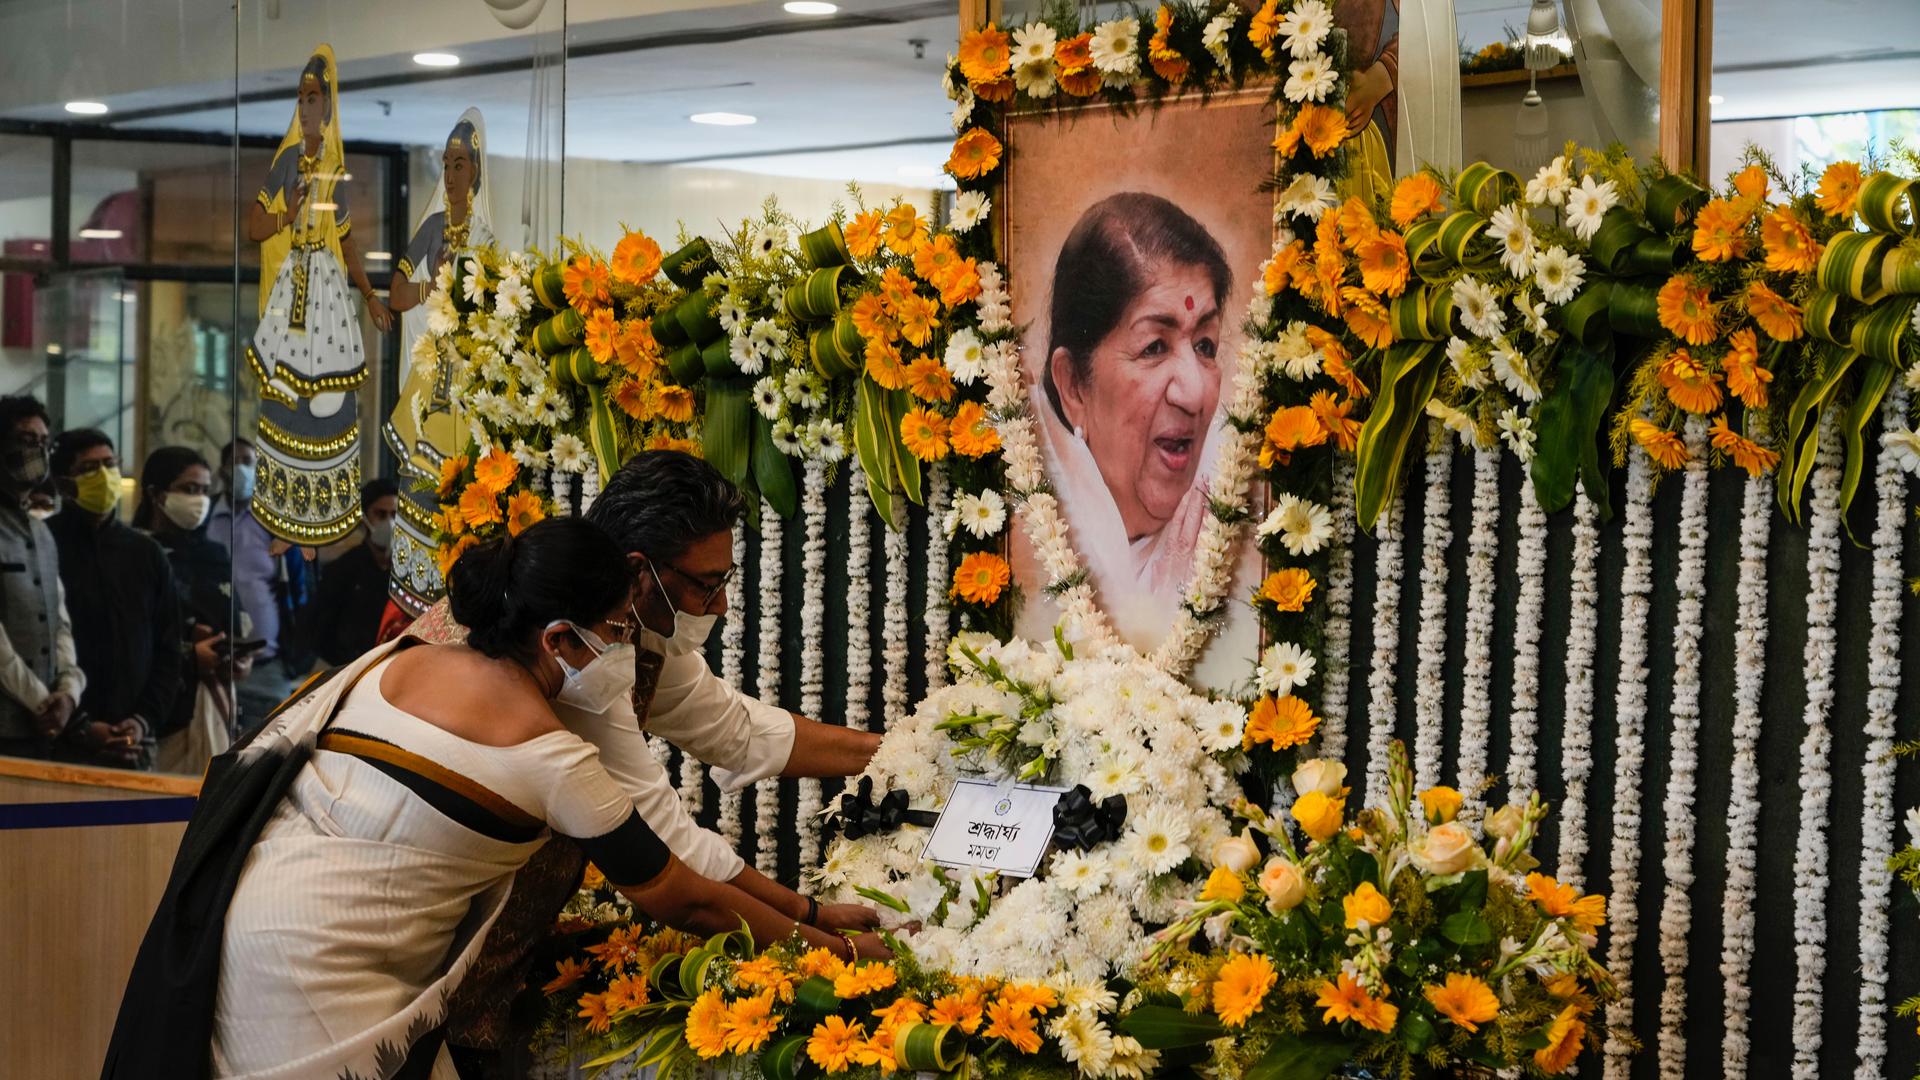 People pay tribute in front of a portrait of Lata Mangeshkar, the legendary singer placed on a decorated podium in Kolkata, India, Feb. 7, 2022. 